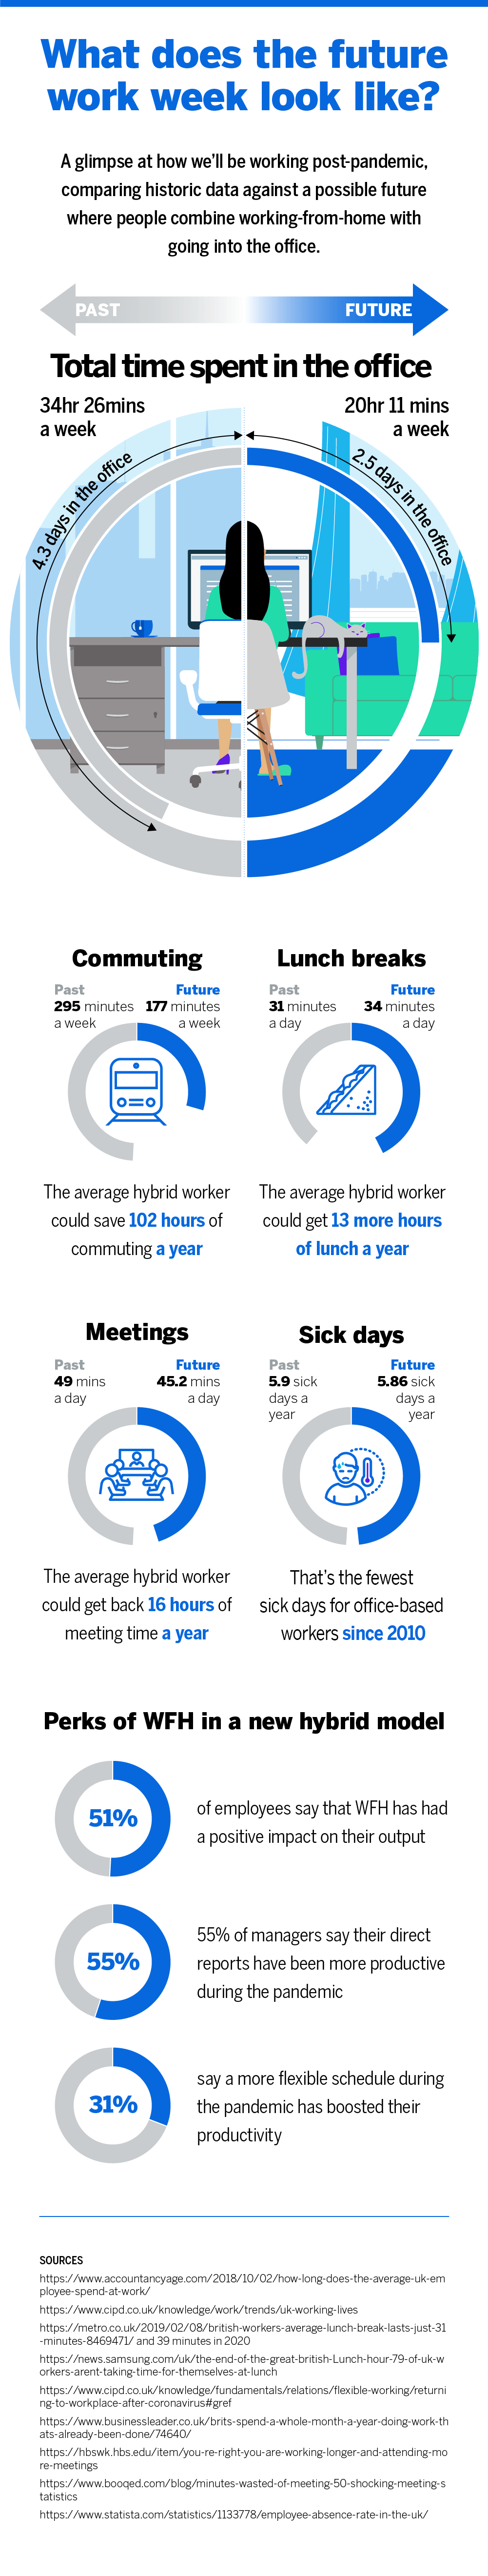 What does the future work week look like?